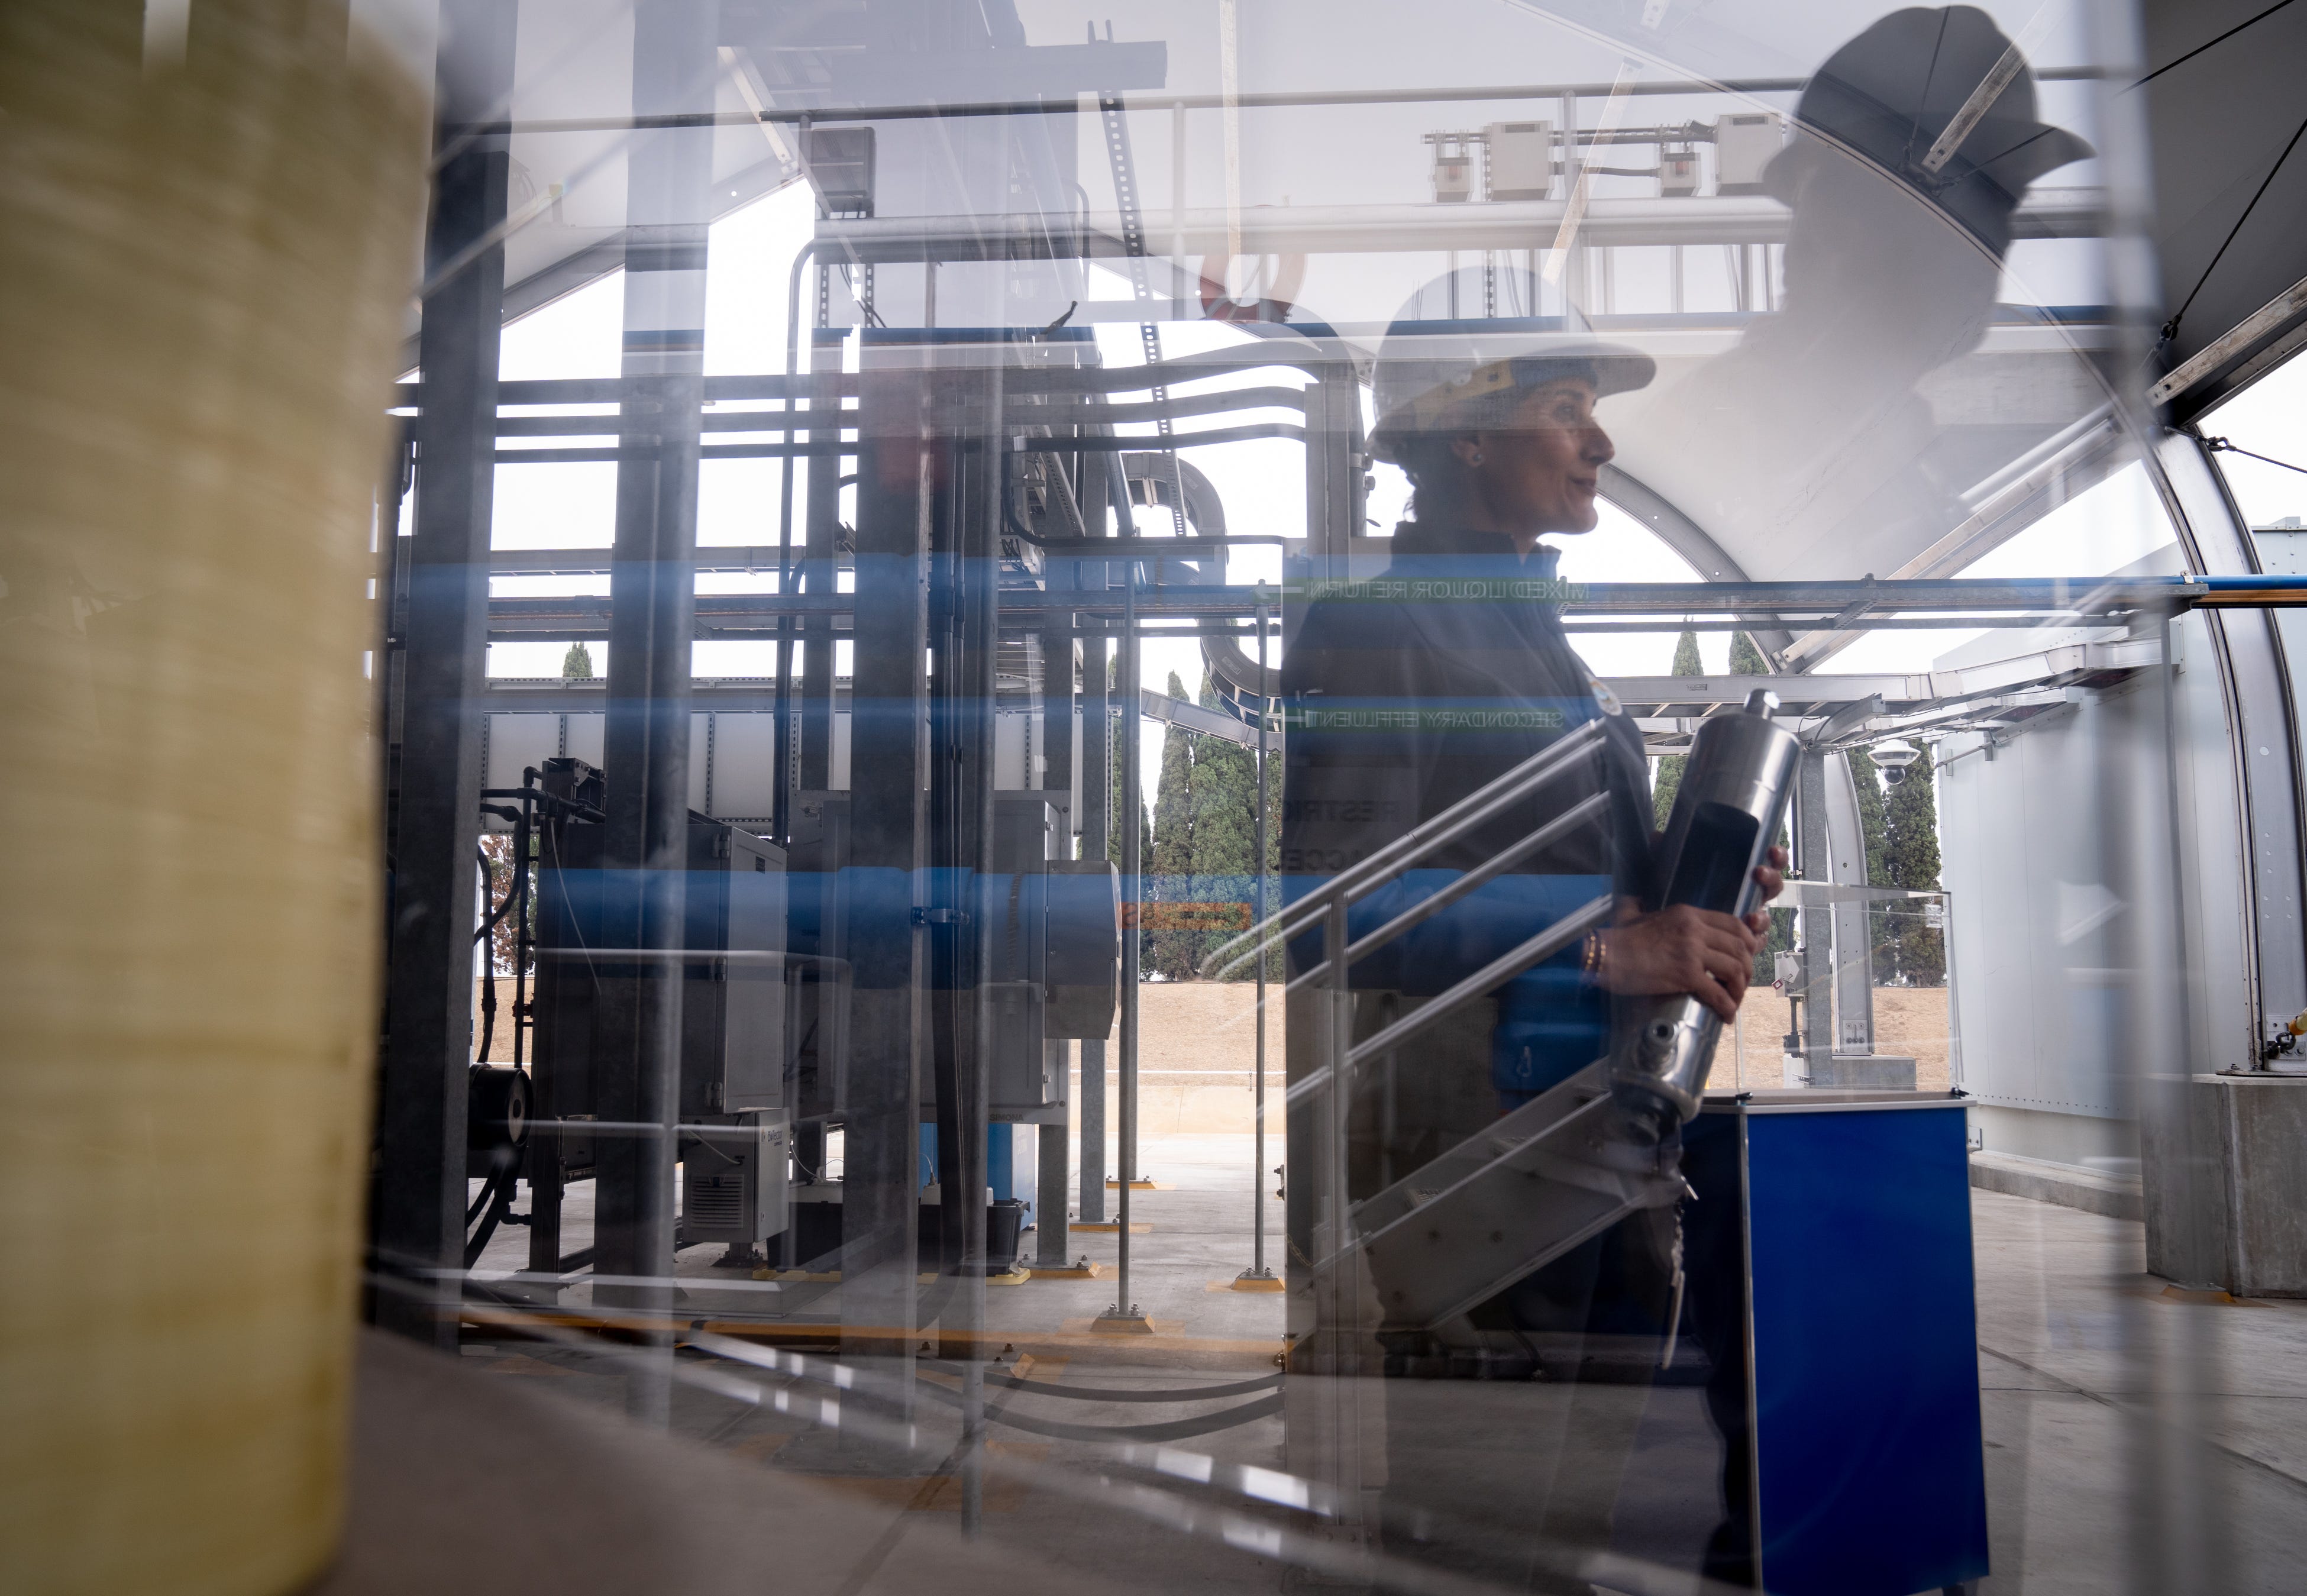 Rupam Soni answers questions during a tour of the Regional Recycled Water Advanced Purification Center on May 19, 2022, in Carson, California. The facility employs a triple-treatment method to recycle water.